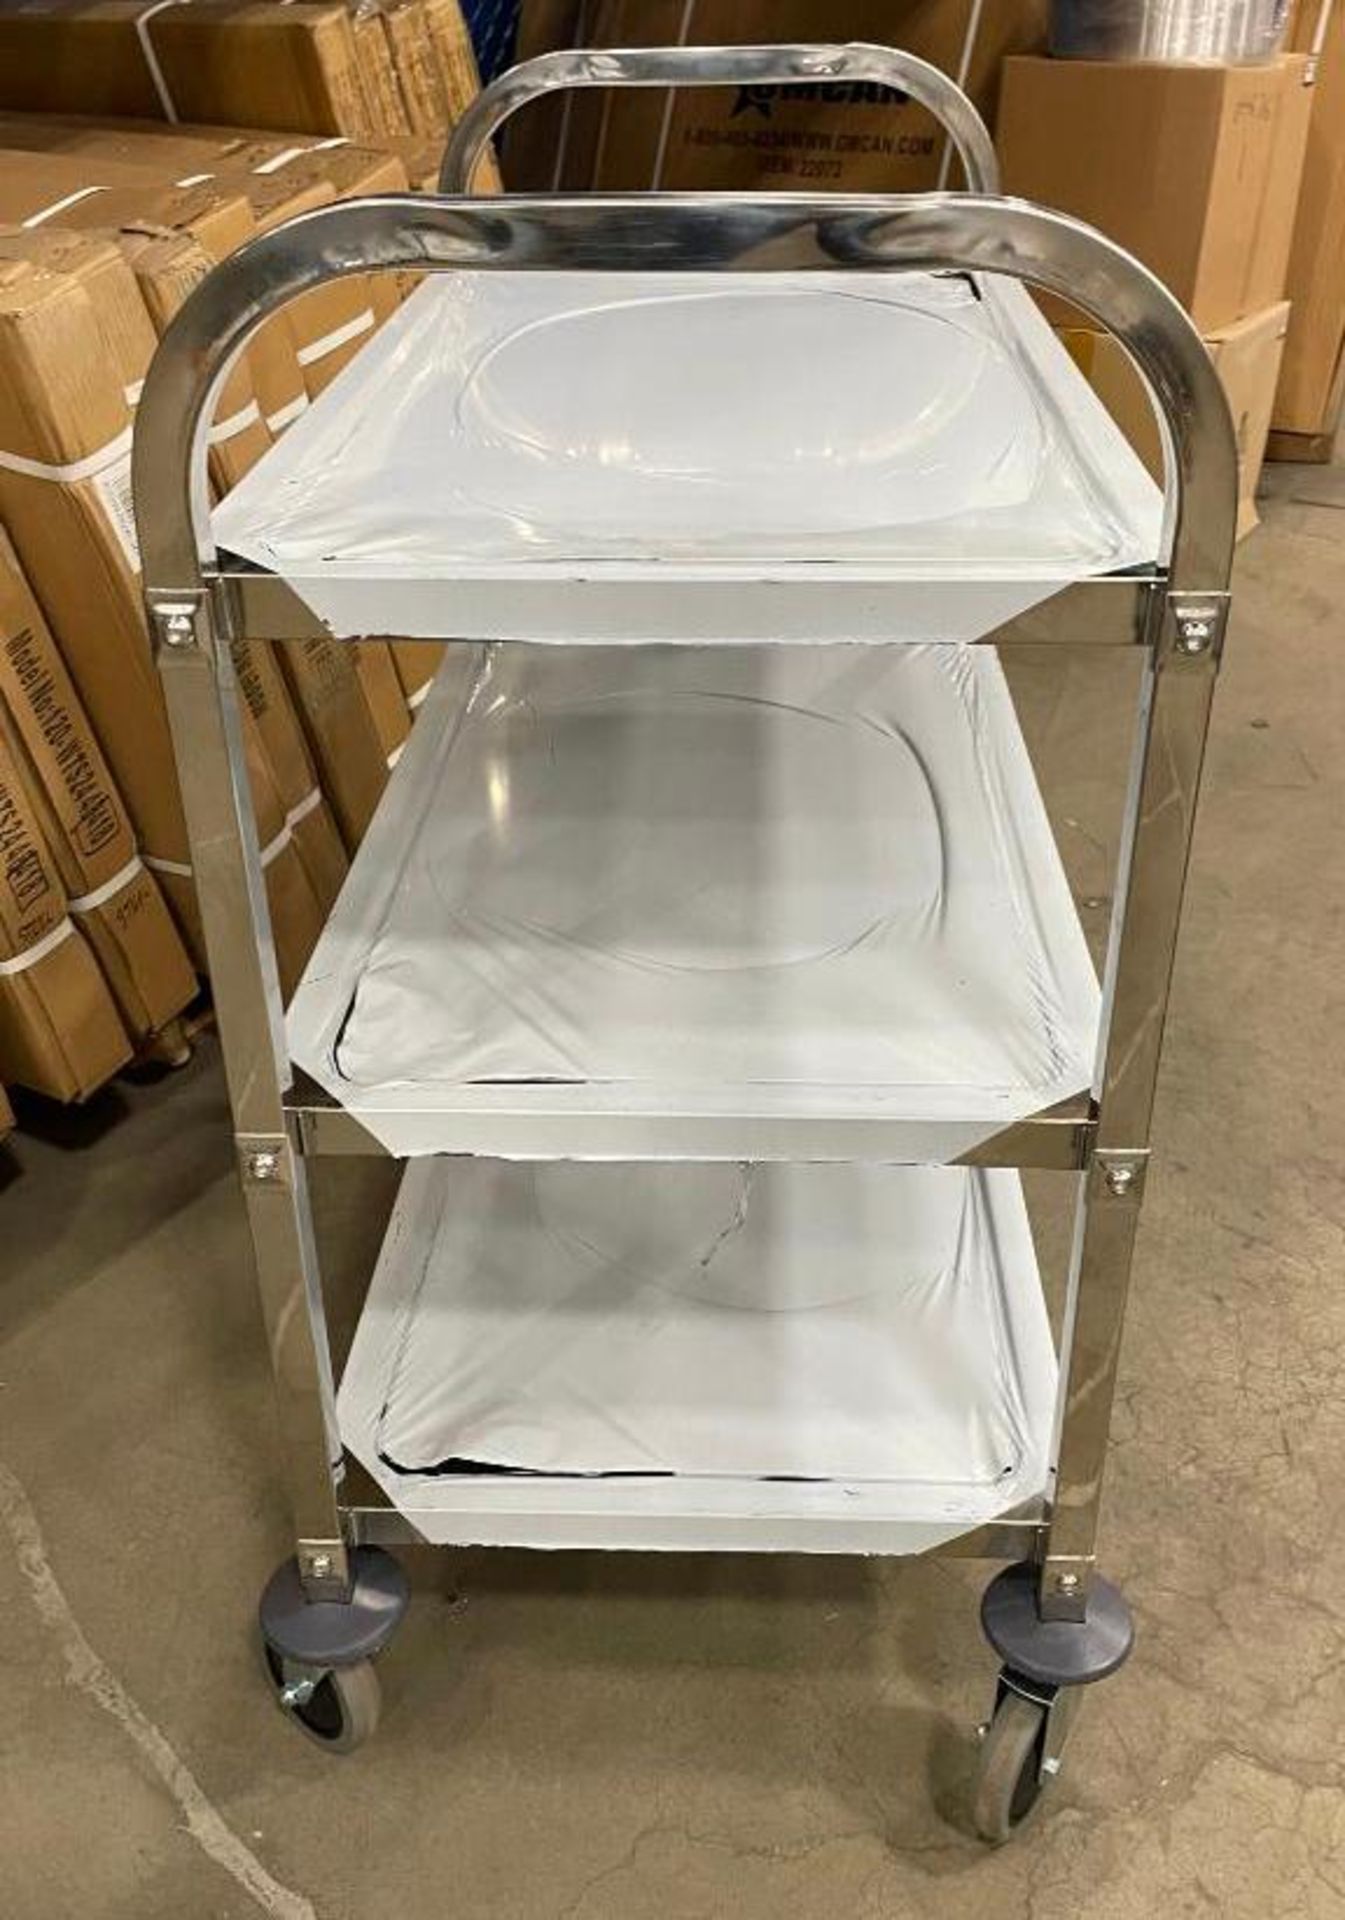 31" X 17" STAINLESS STEEL 3 TIER BUSSING CART - NEW - OMCAN 24419 - Image 3 of 4